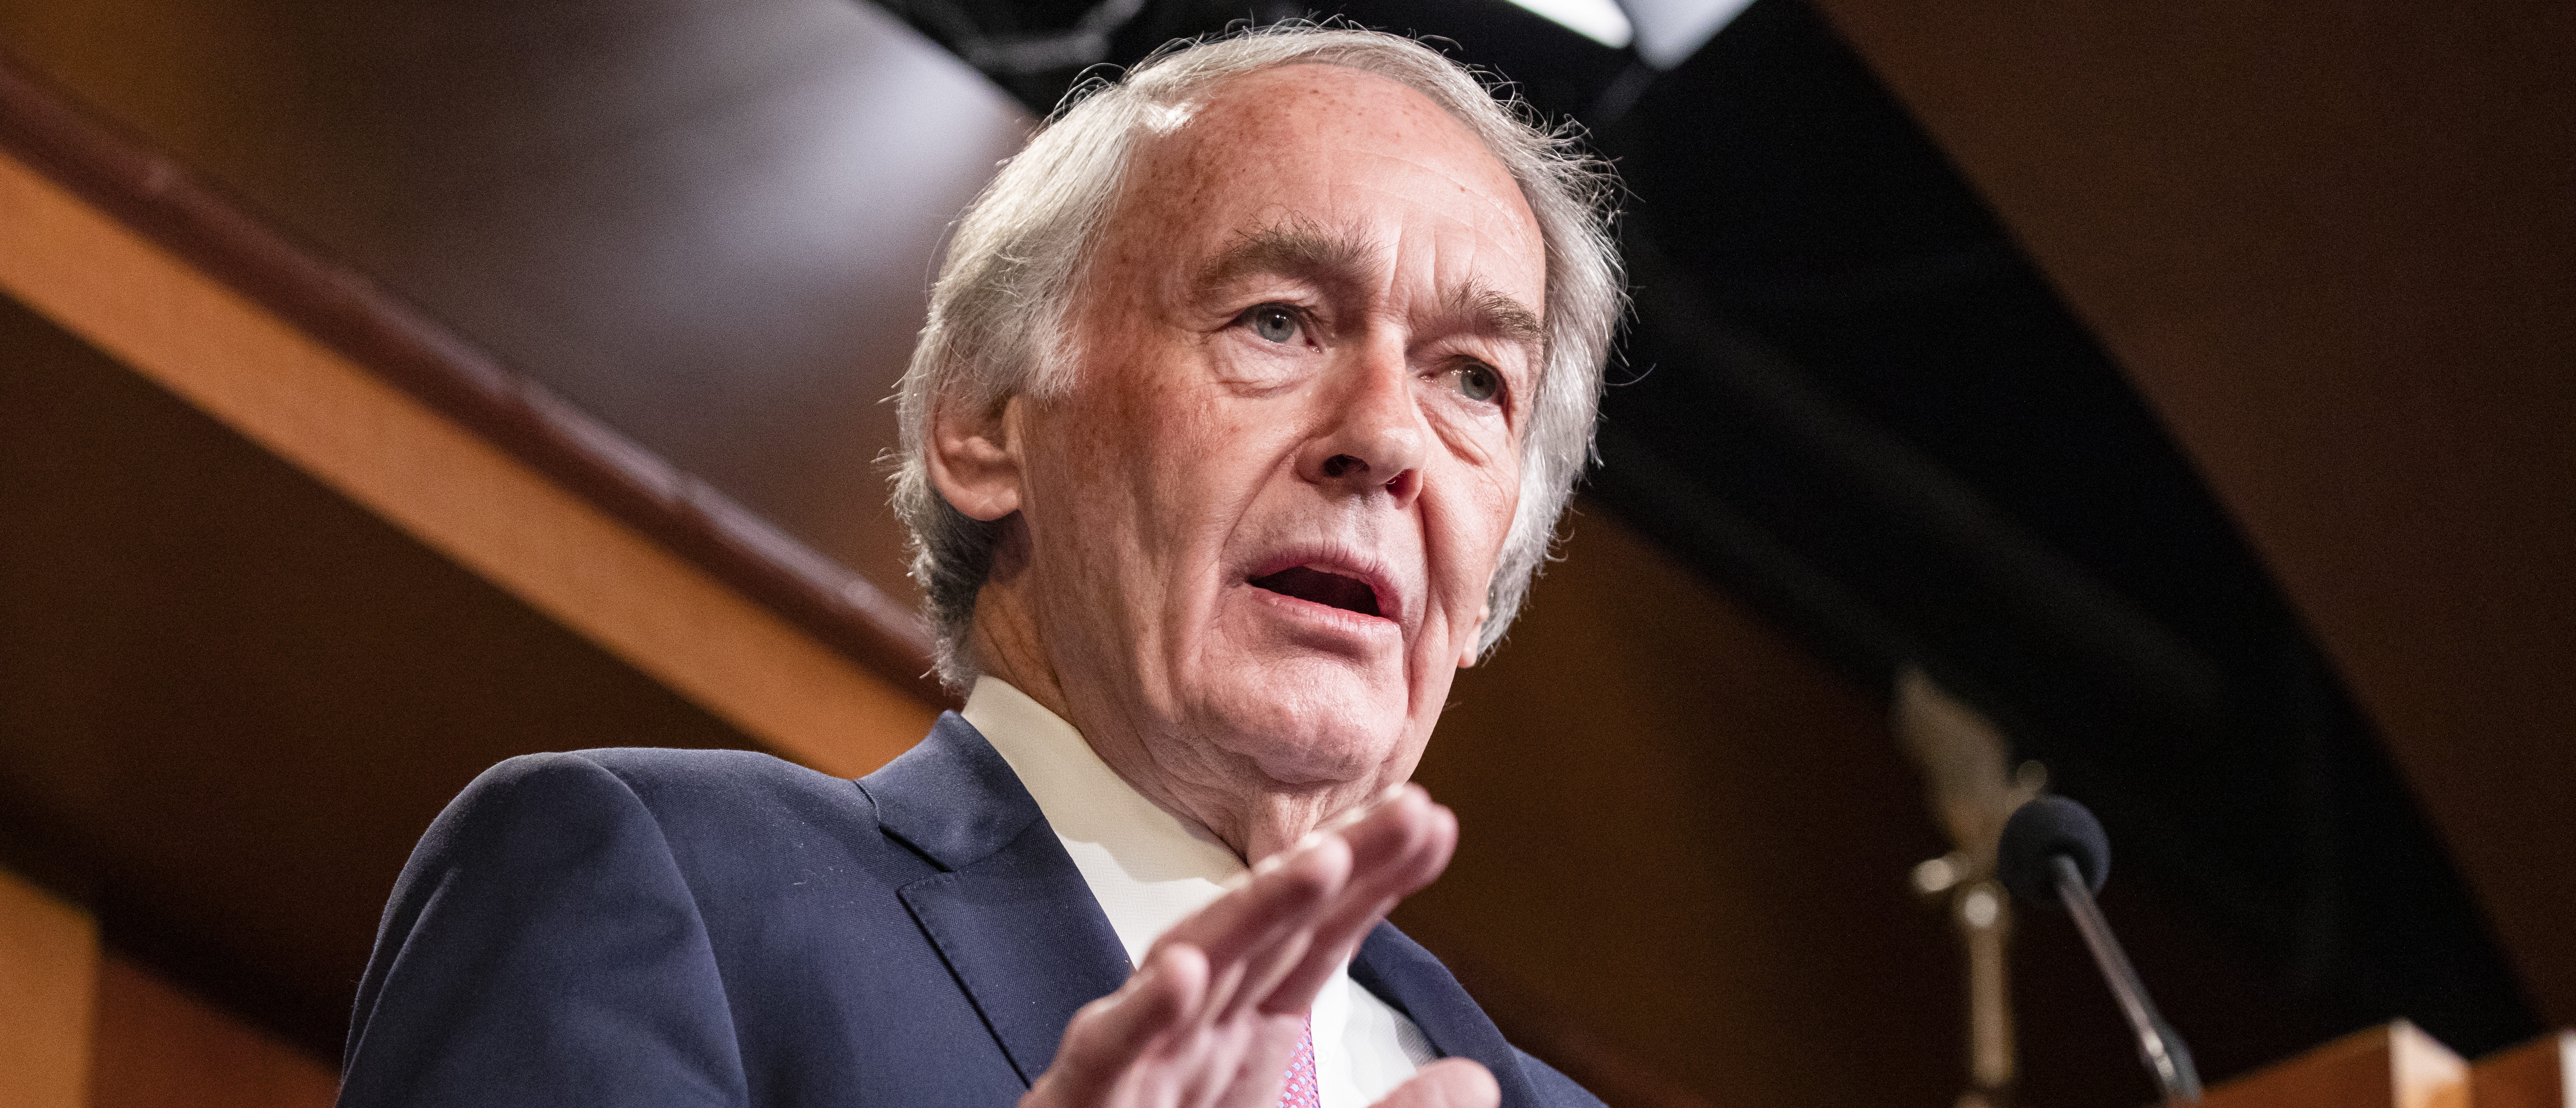 WASHINGTON, DC - JANUARY 24: Senator Ed Markey (D-MA) speaks during a press conference on the Senate impeachment trial of President Donald Trump on January 24, 2020 in Washington, DC. (Photo by Samuel Corum/Getty Images)